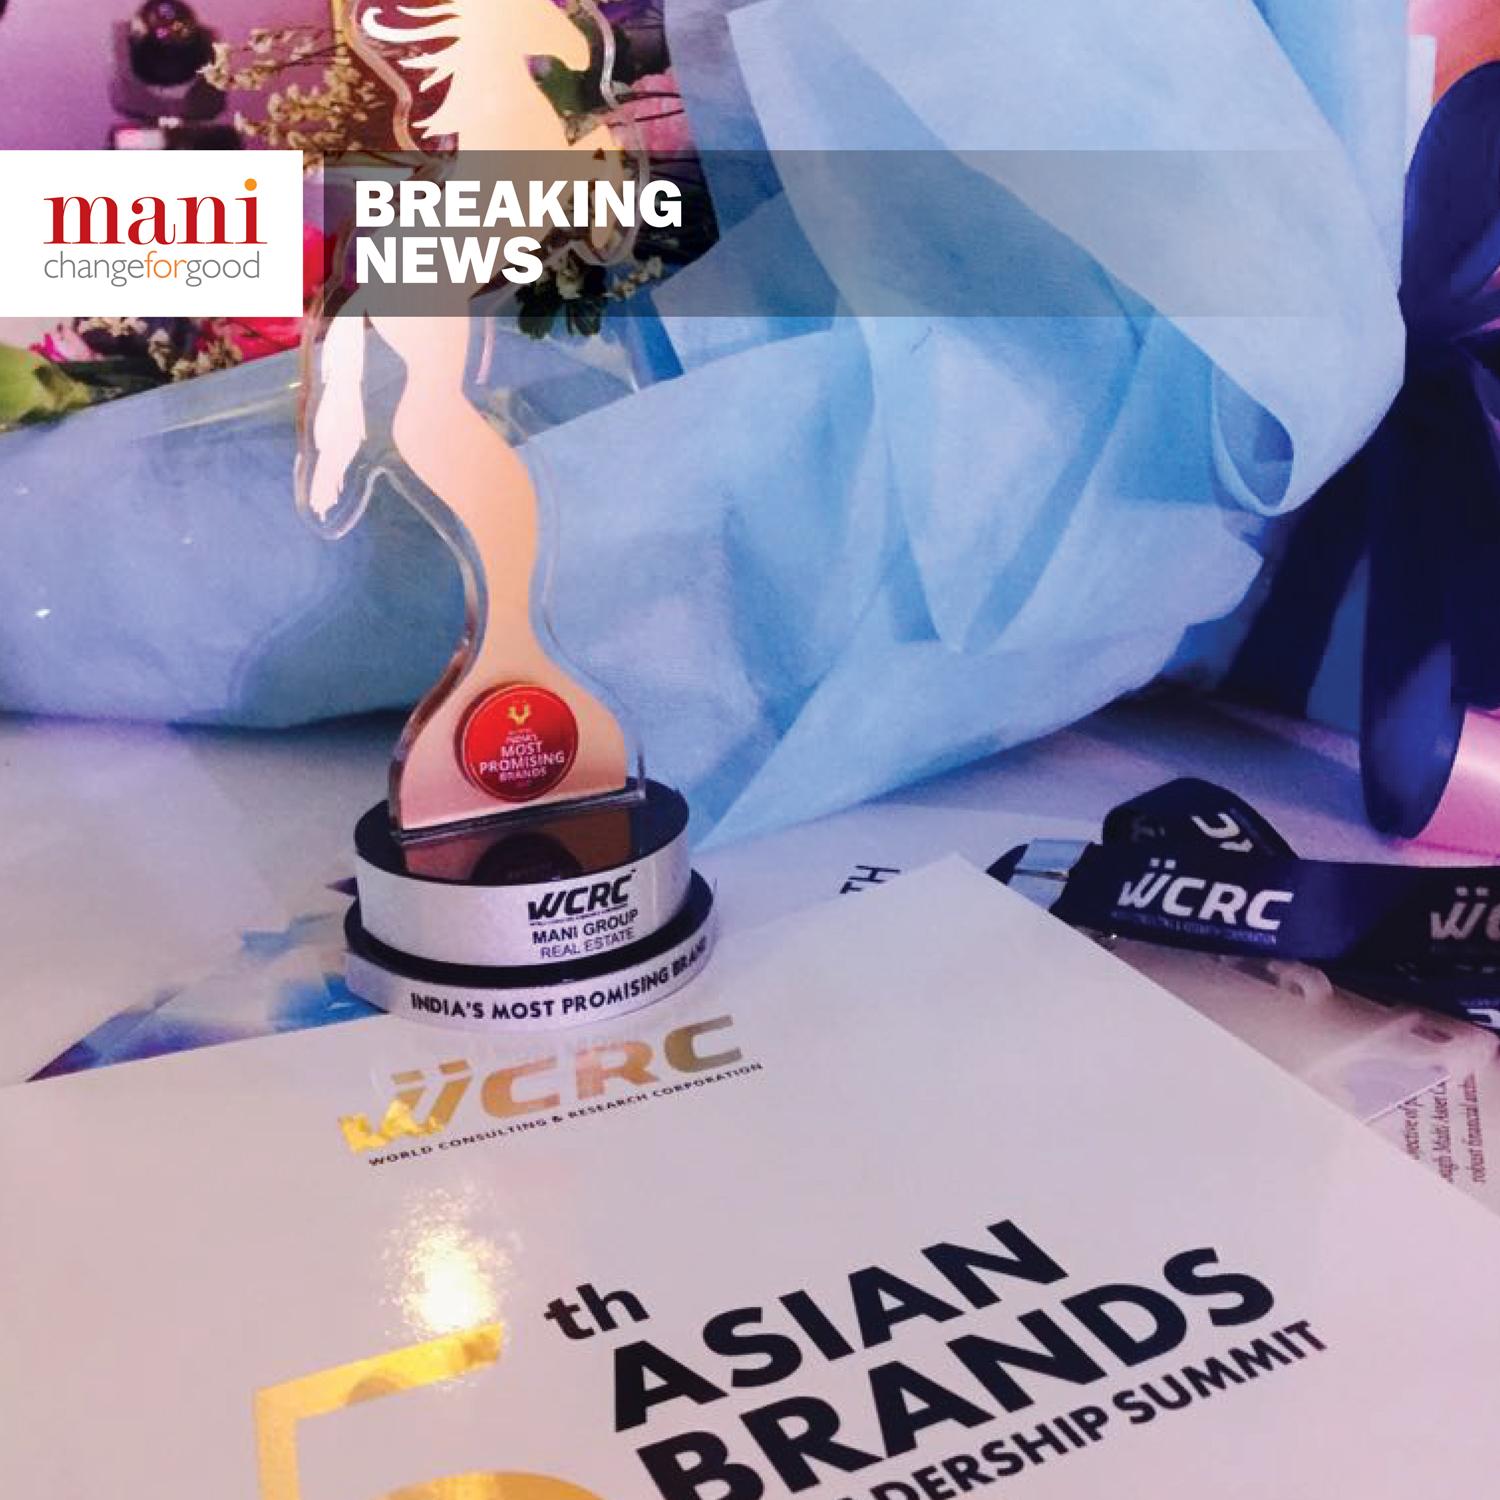 Mani Group awarded for being the Most Promising Brand in India at the WCRC 5th Asian Brands & Leadership Summit